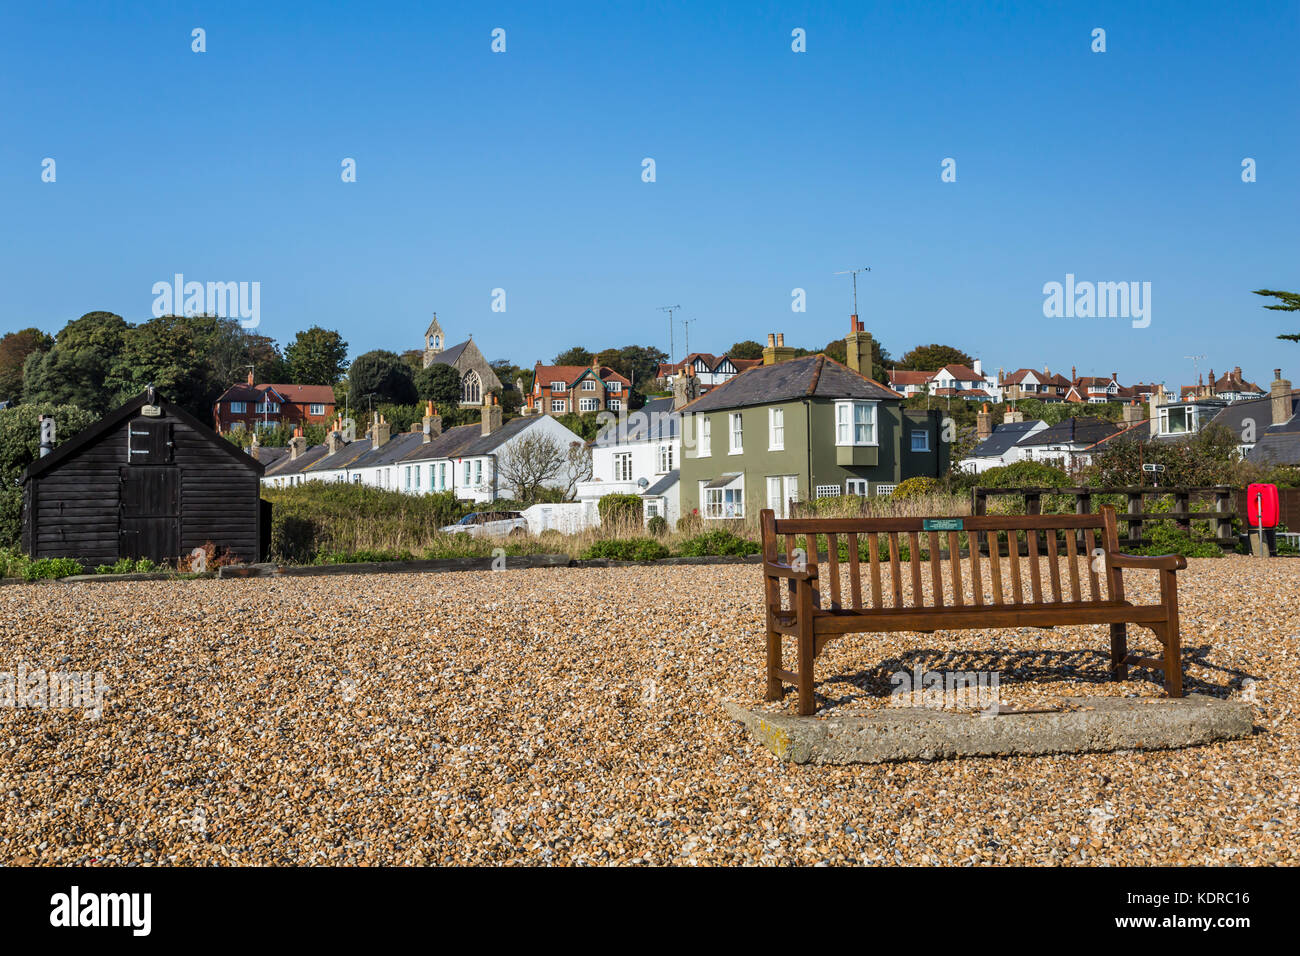 Oldstairs bay and st margarets bay, KENT.UK Stock Photo